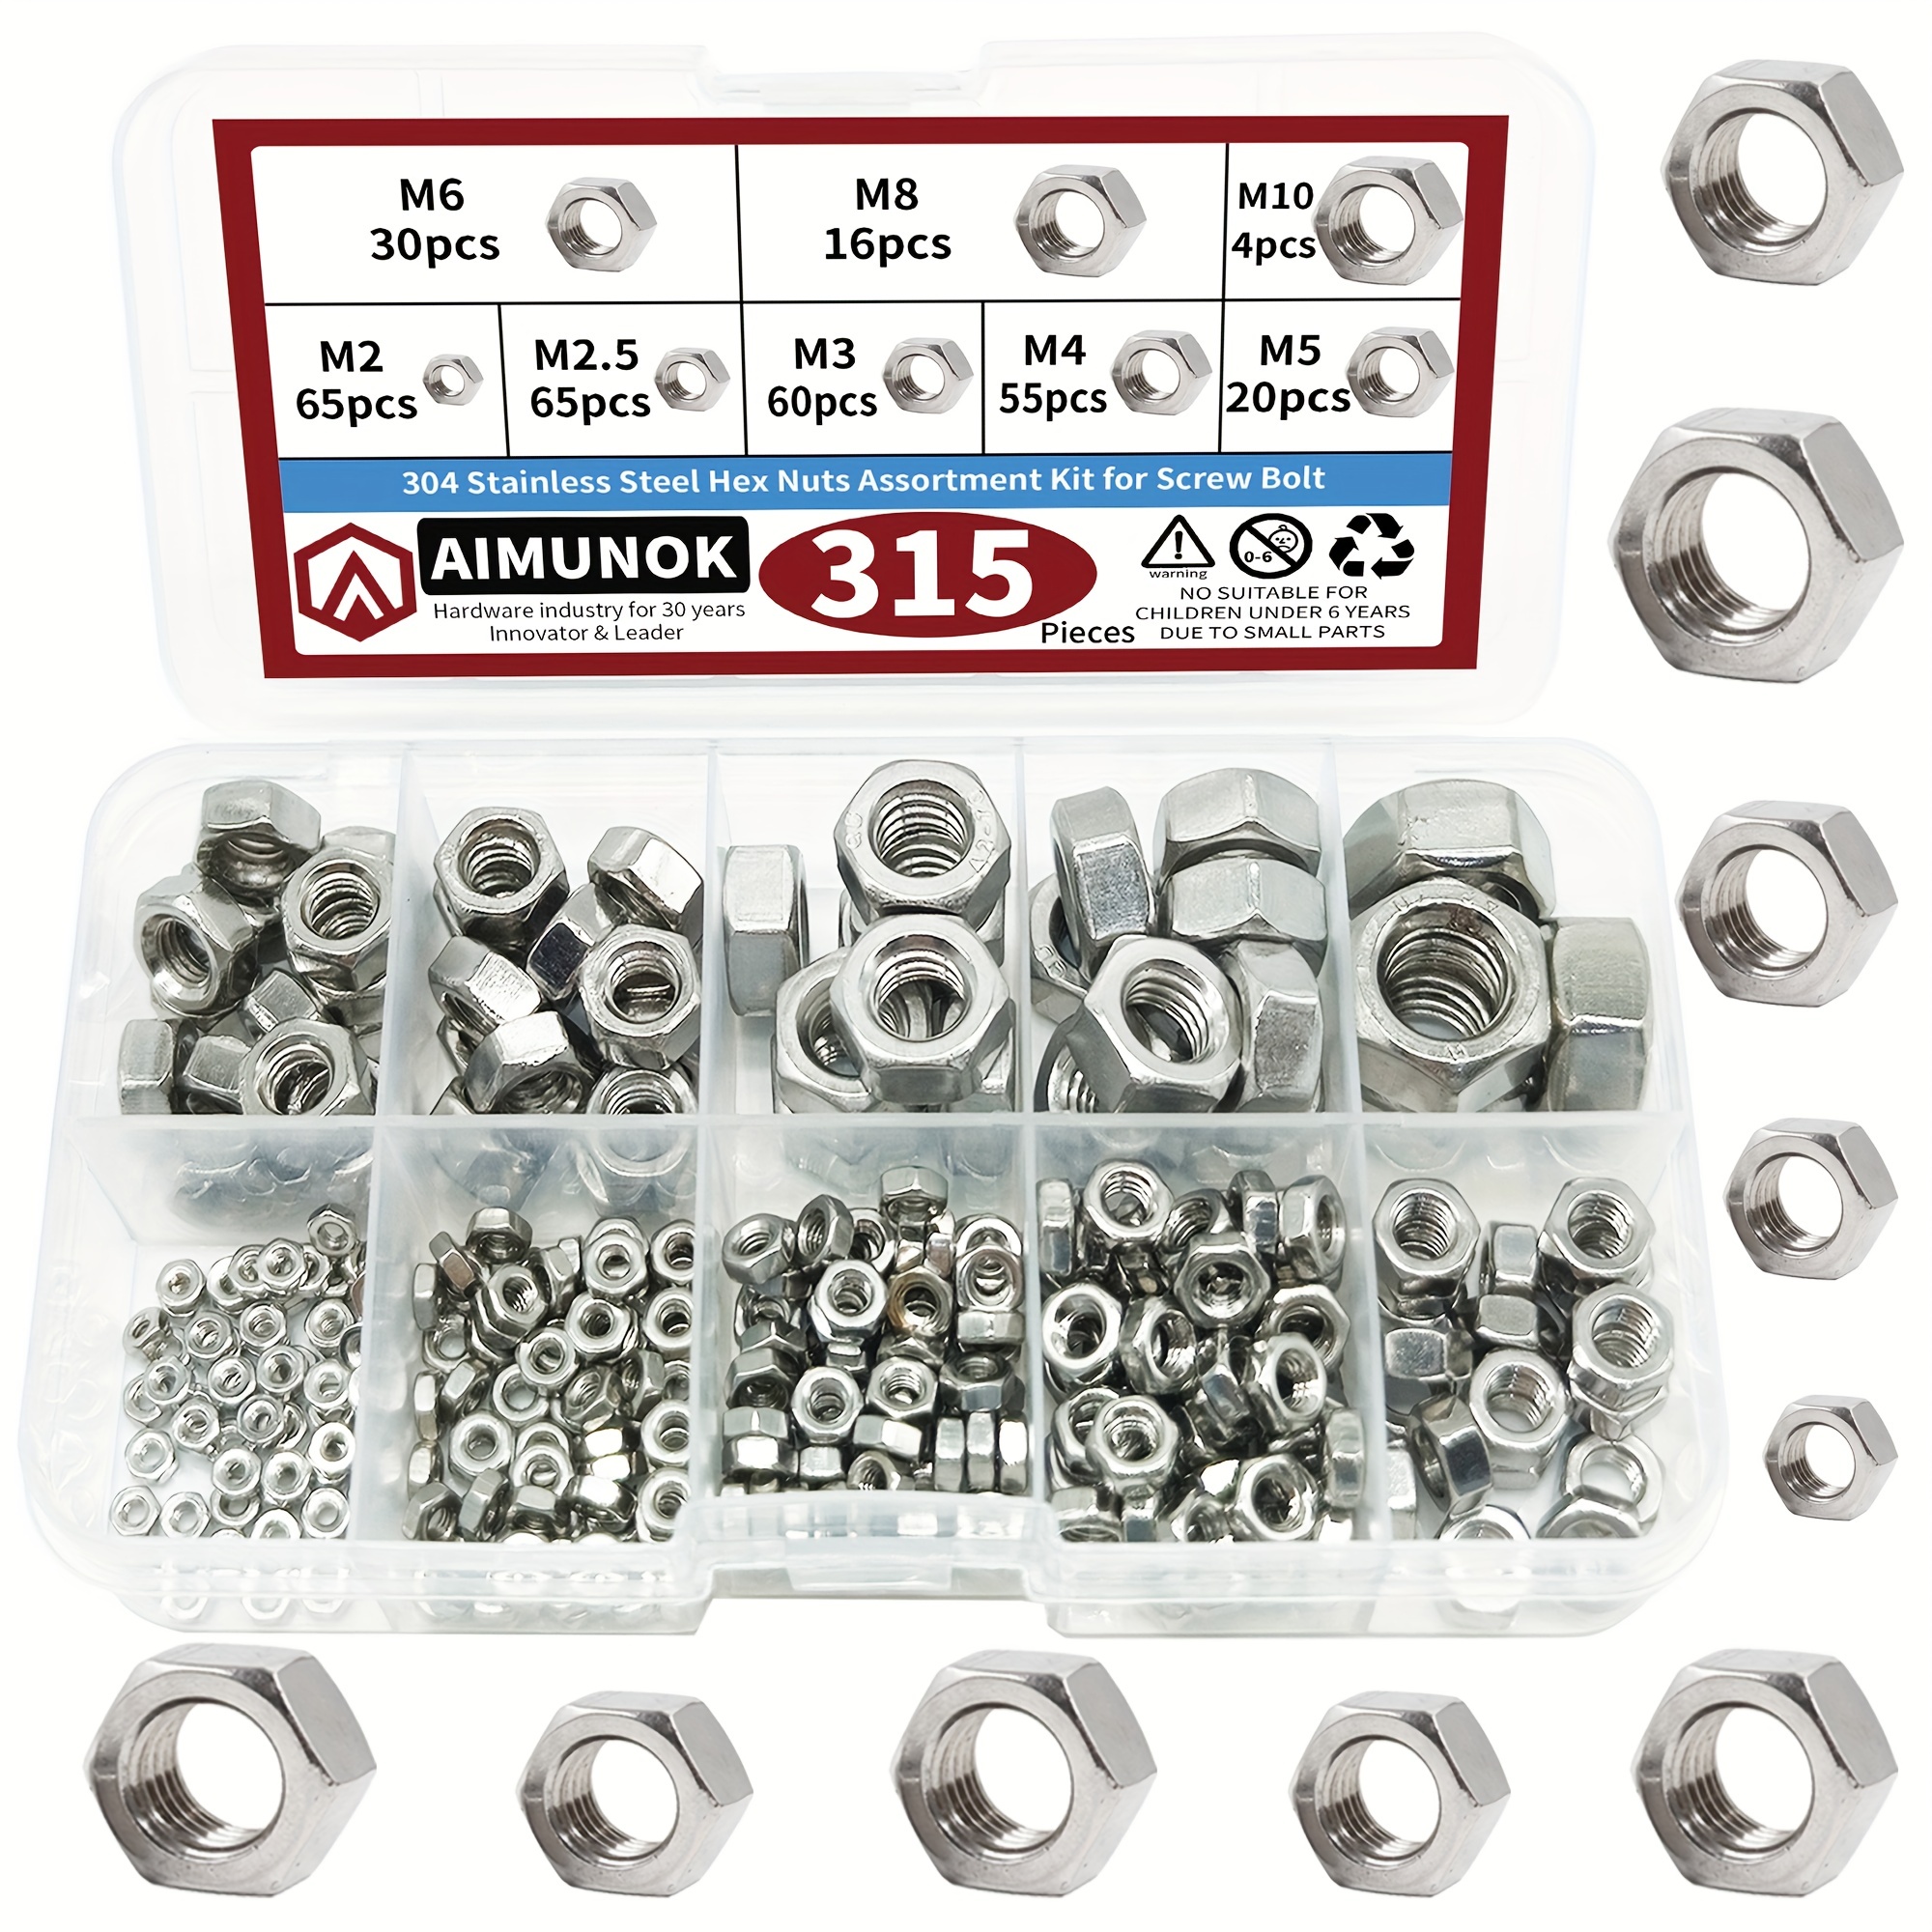 

304 Stainless Steel Hex Nuts Assortment Kit - 315pcs M2-m12 A2-70 Nuts Set For Screws & Bolts